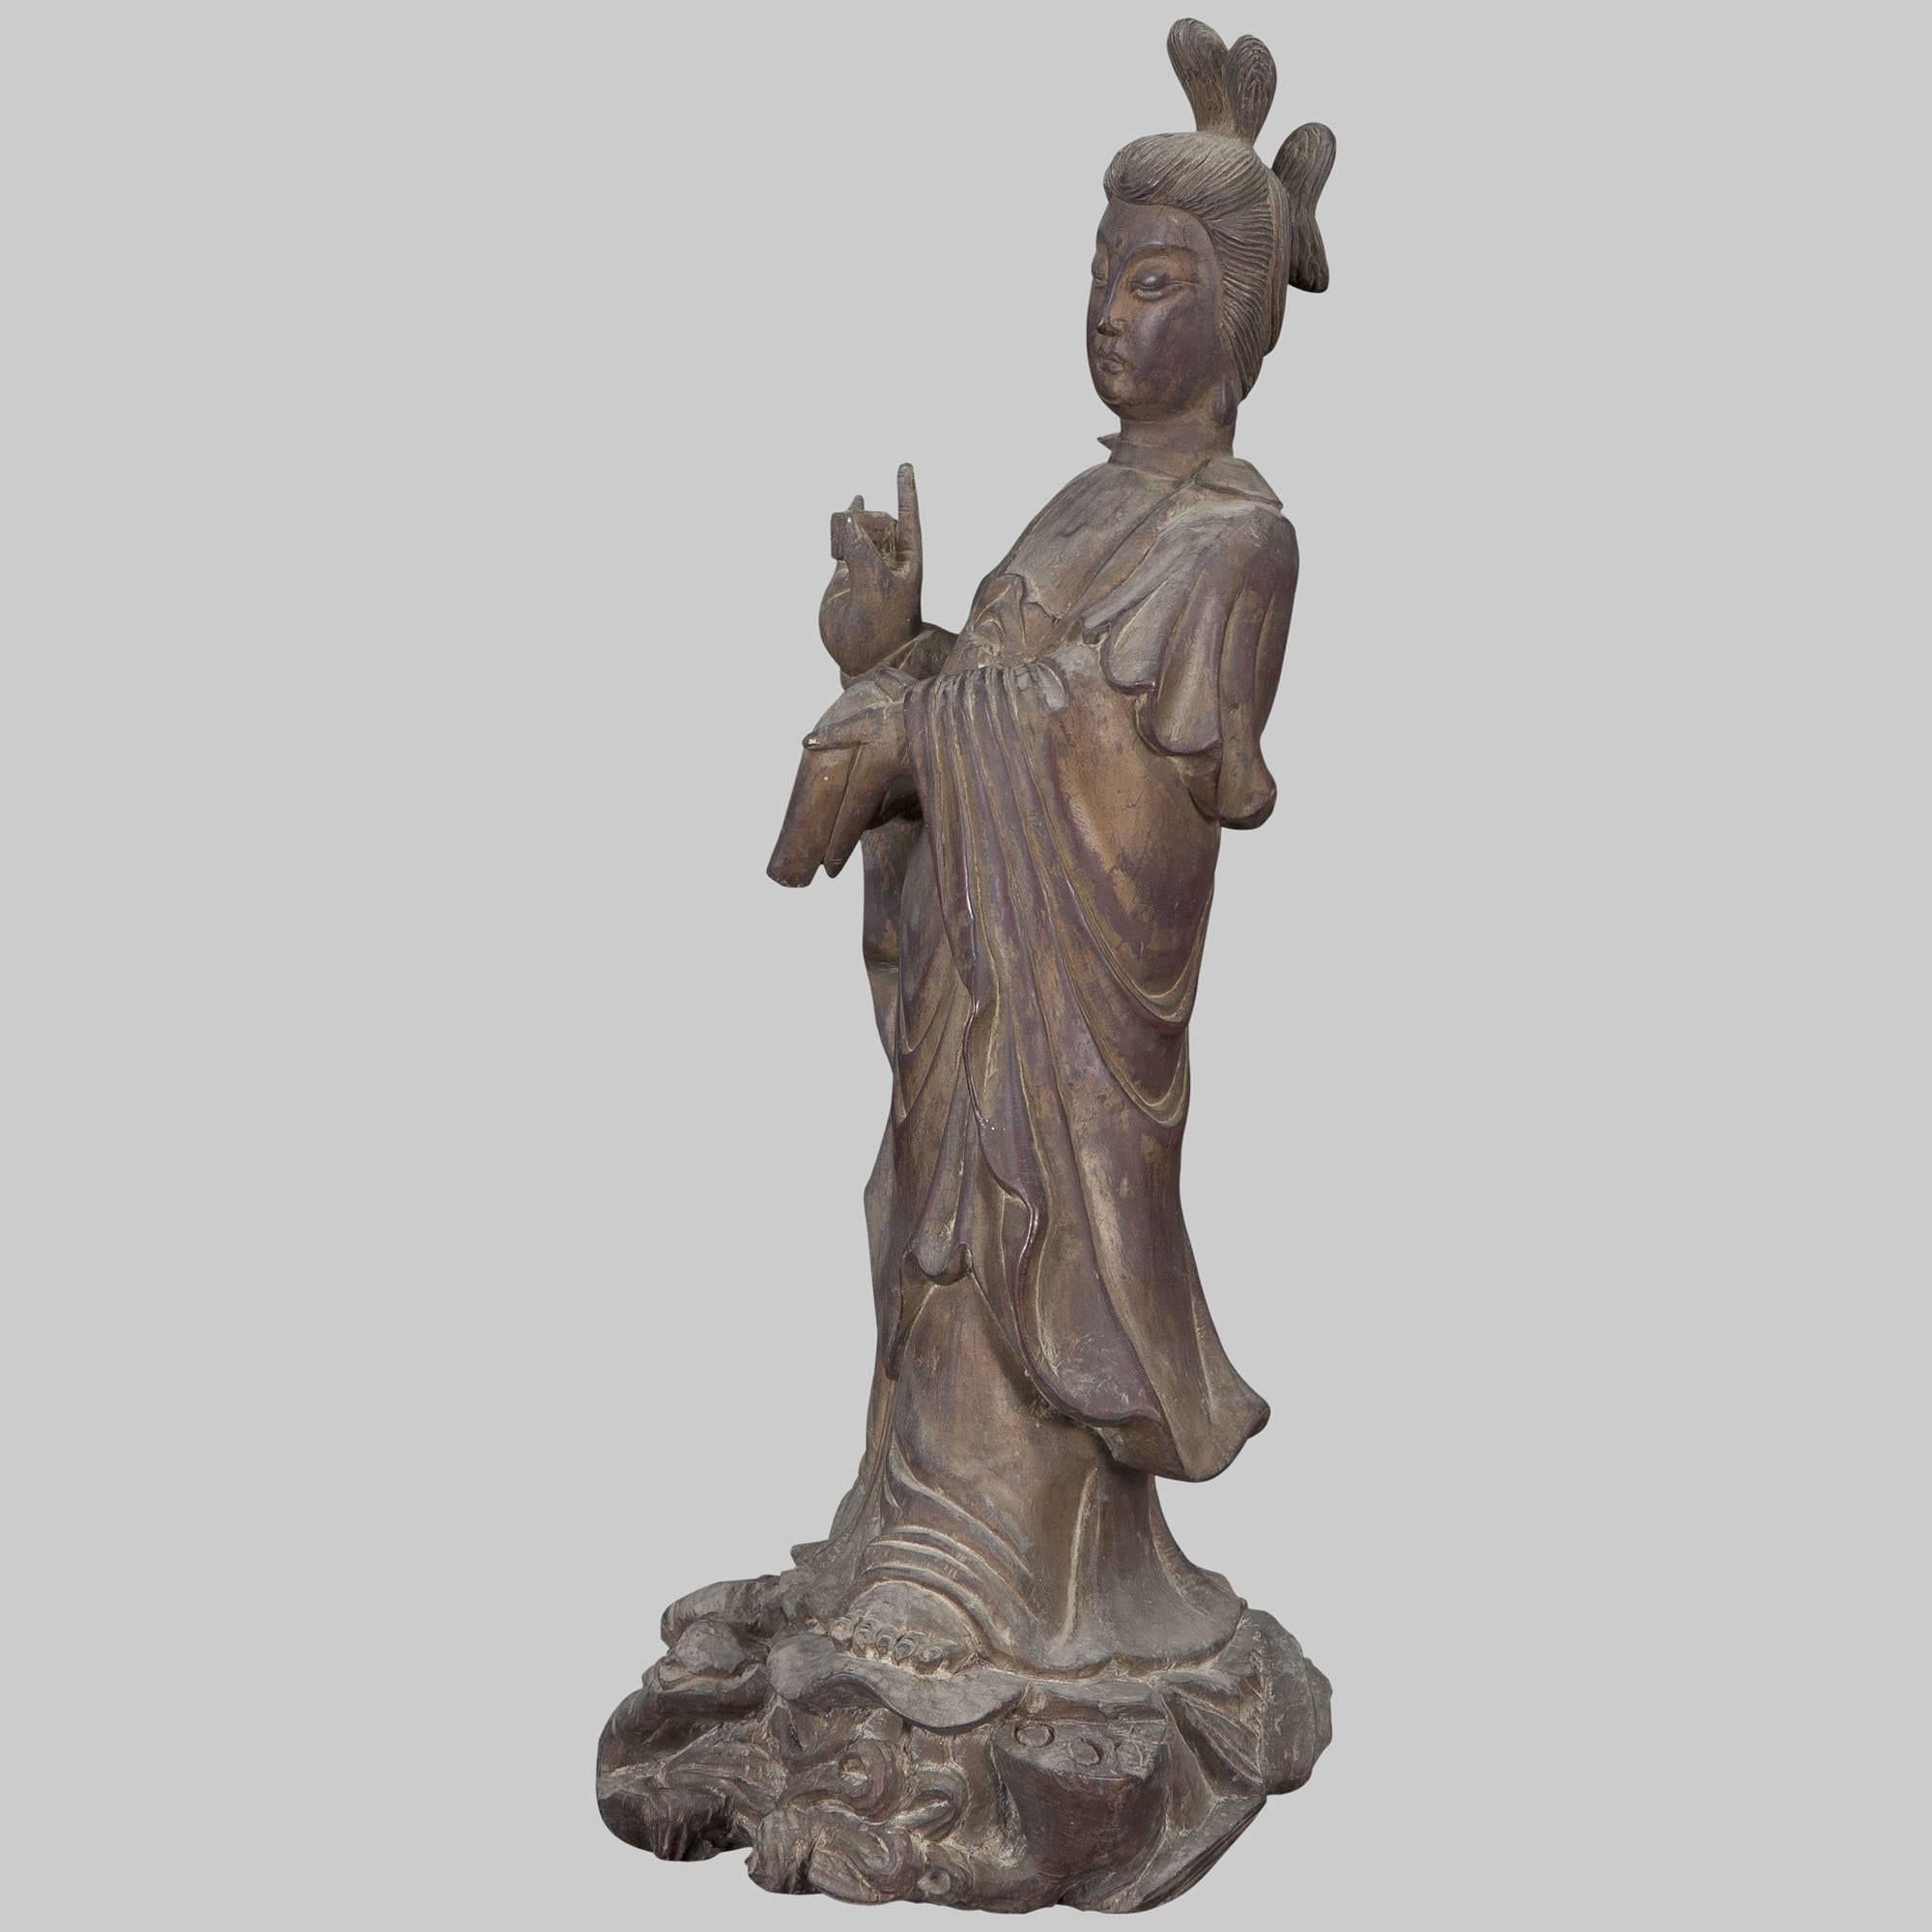 Beautiful Guanyin. Goddess is depicted standing, always looking down, towards those who suffer.

The right hand is raised in Karana mudra, which expels demons and removes obstacles such as sickness or negative thoughts. It is made by raising the